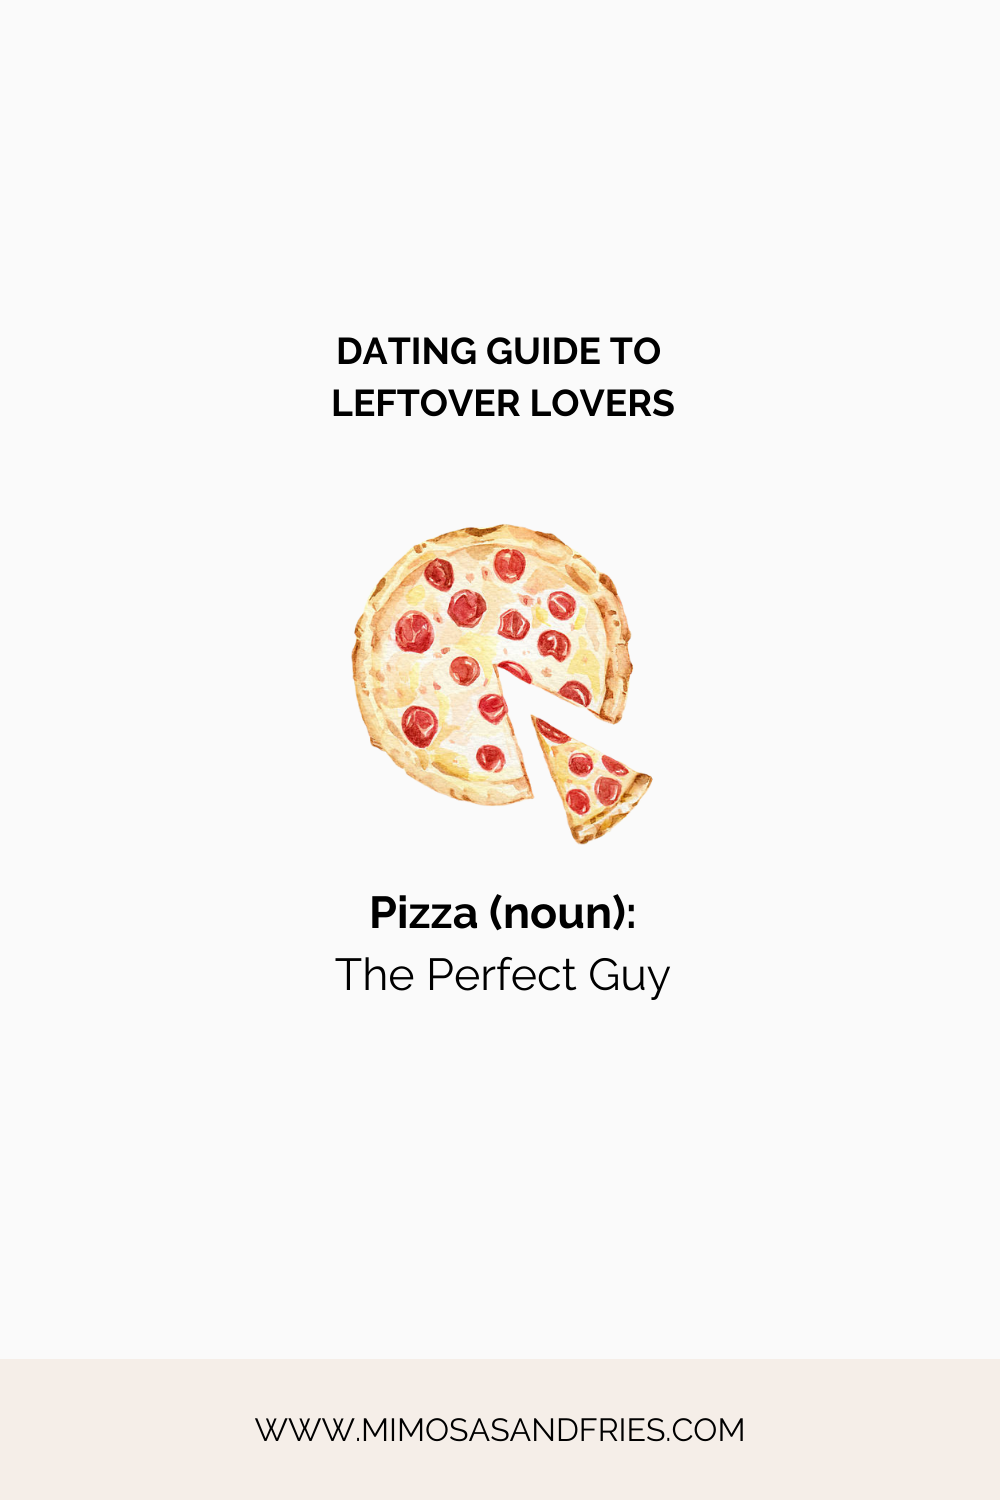 A Woman’s Guide to Dating Leftover Lovers